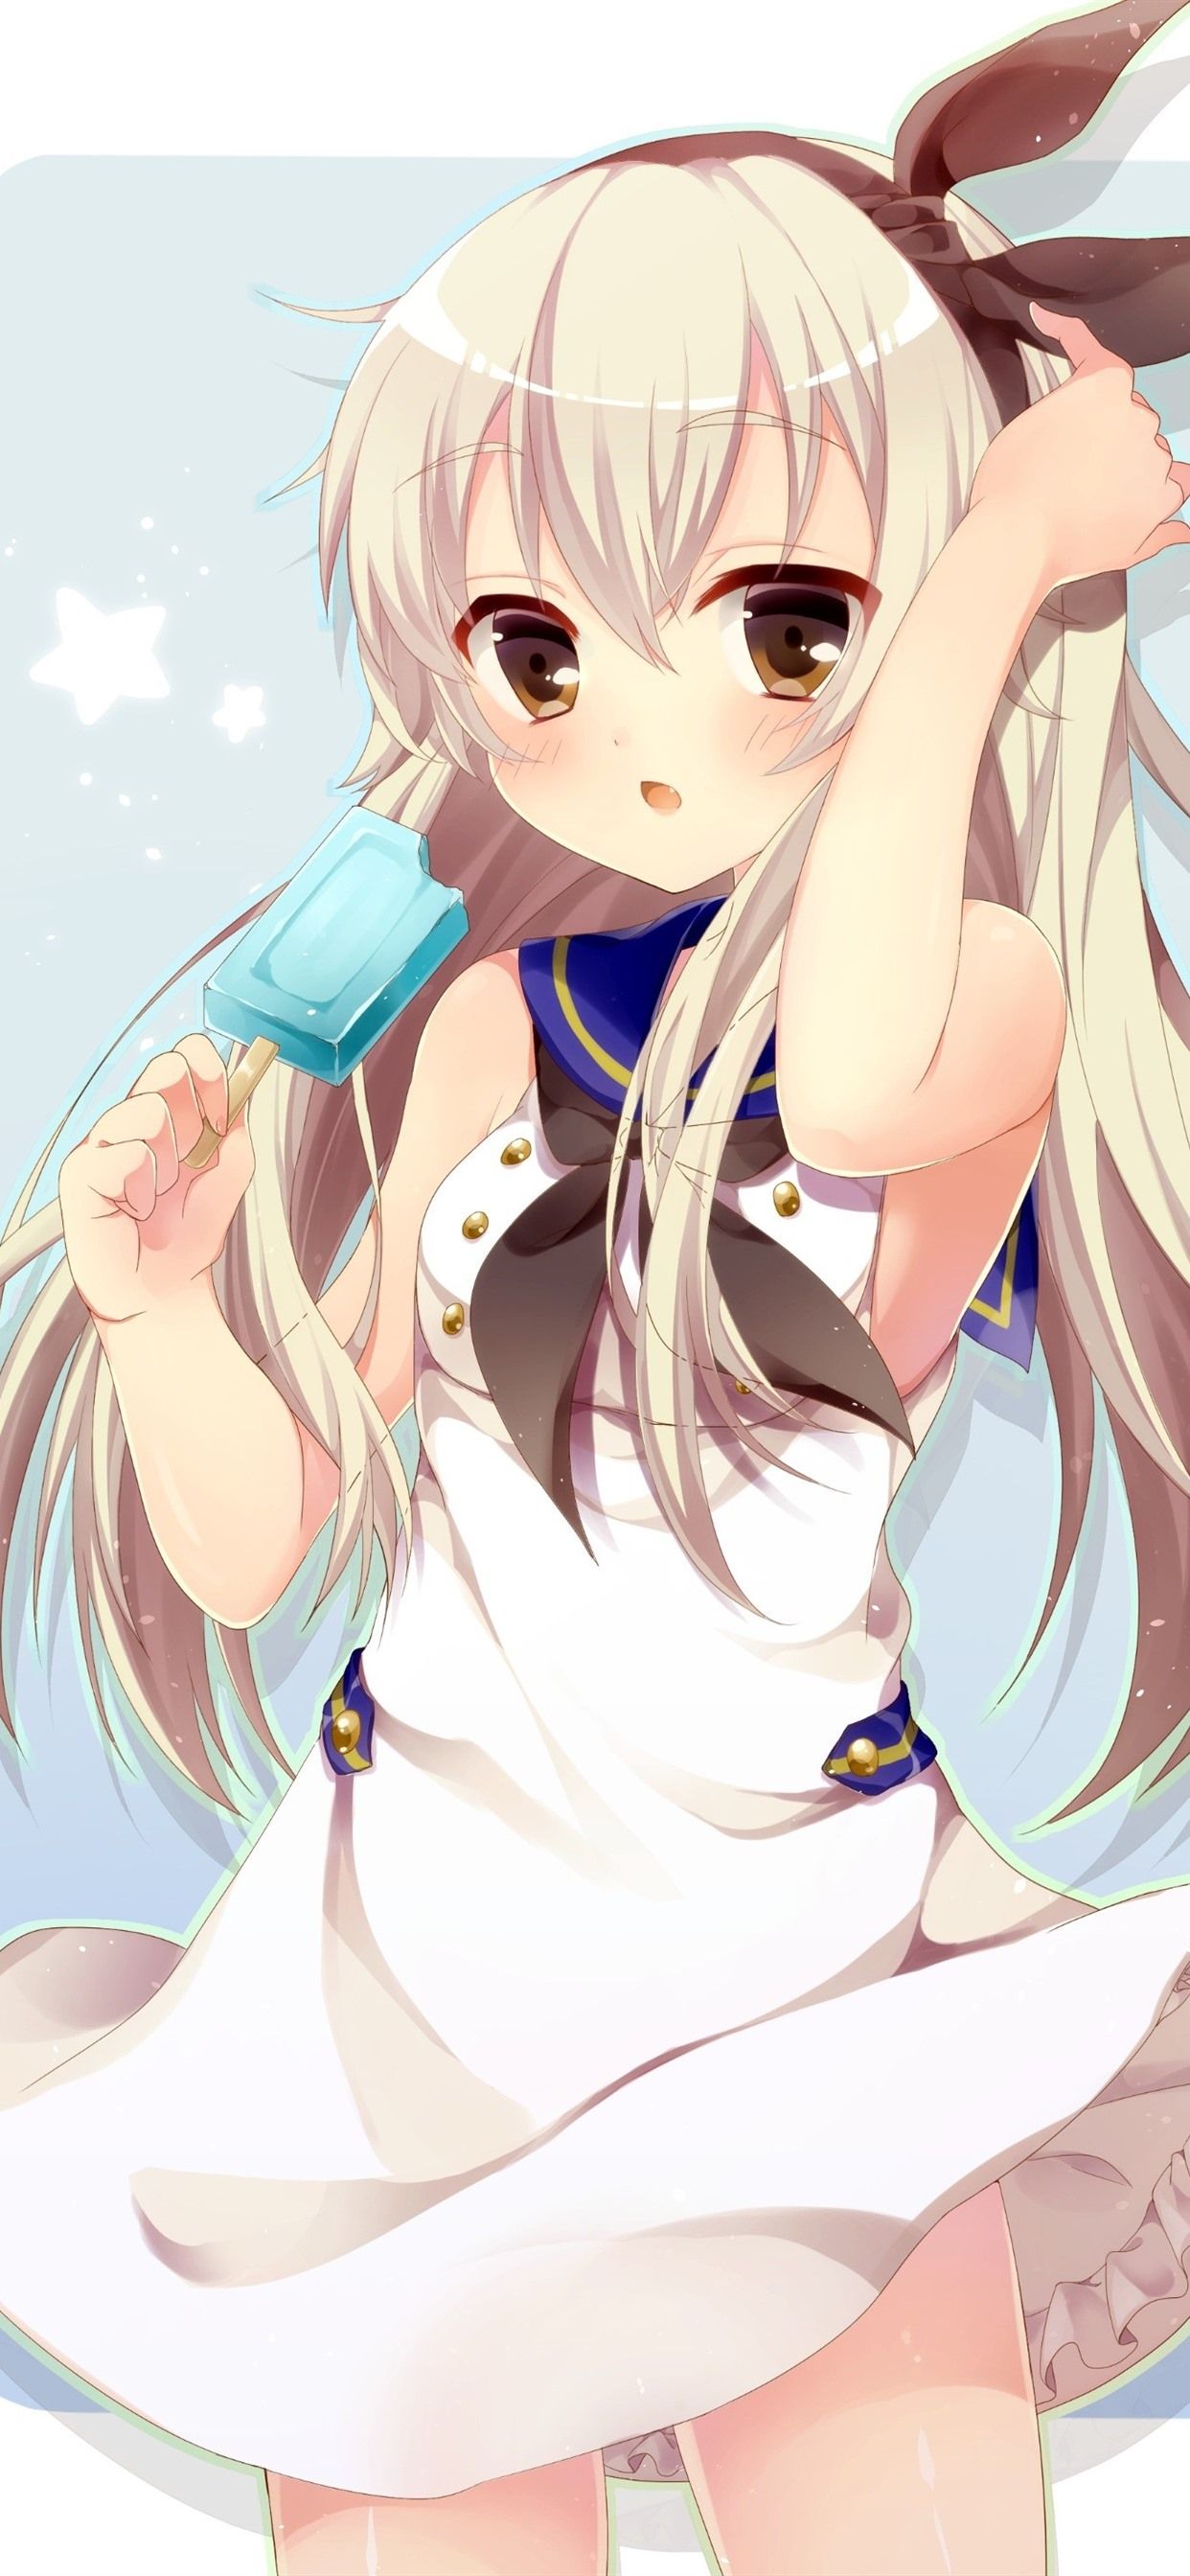 Blonde Anime Girl Eat Ice Cream 1242x2688 IPhone 11 Pro XS Max Wallpaper, Background, Picture, Image